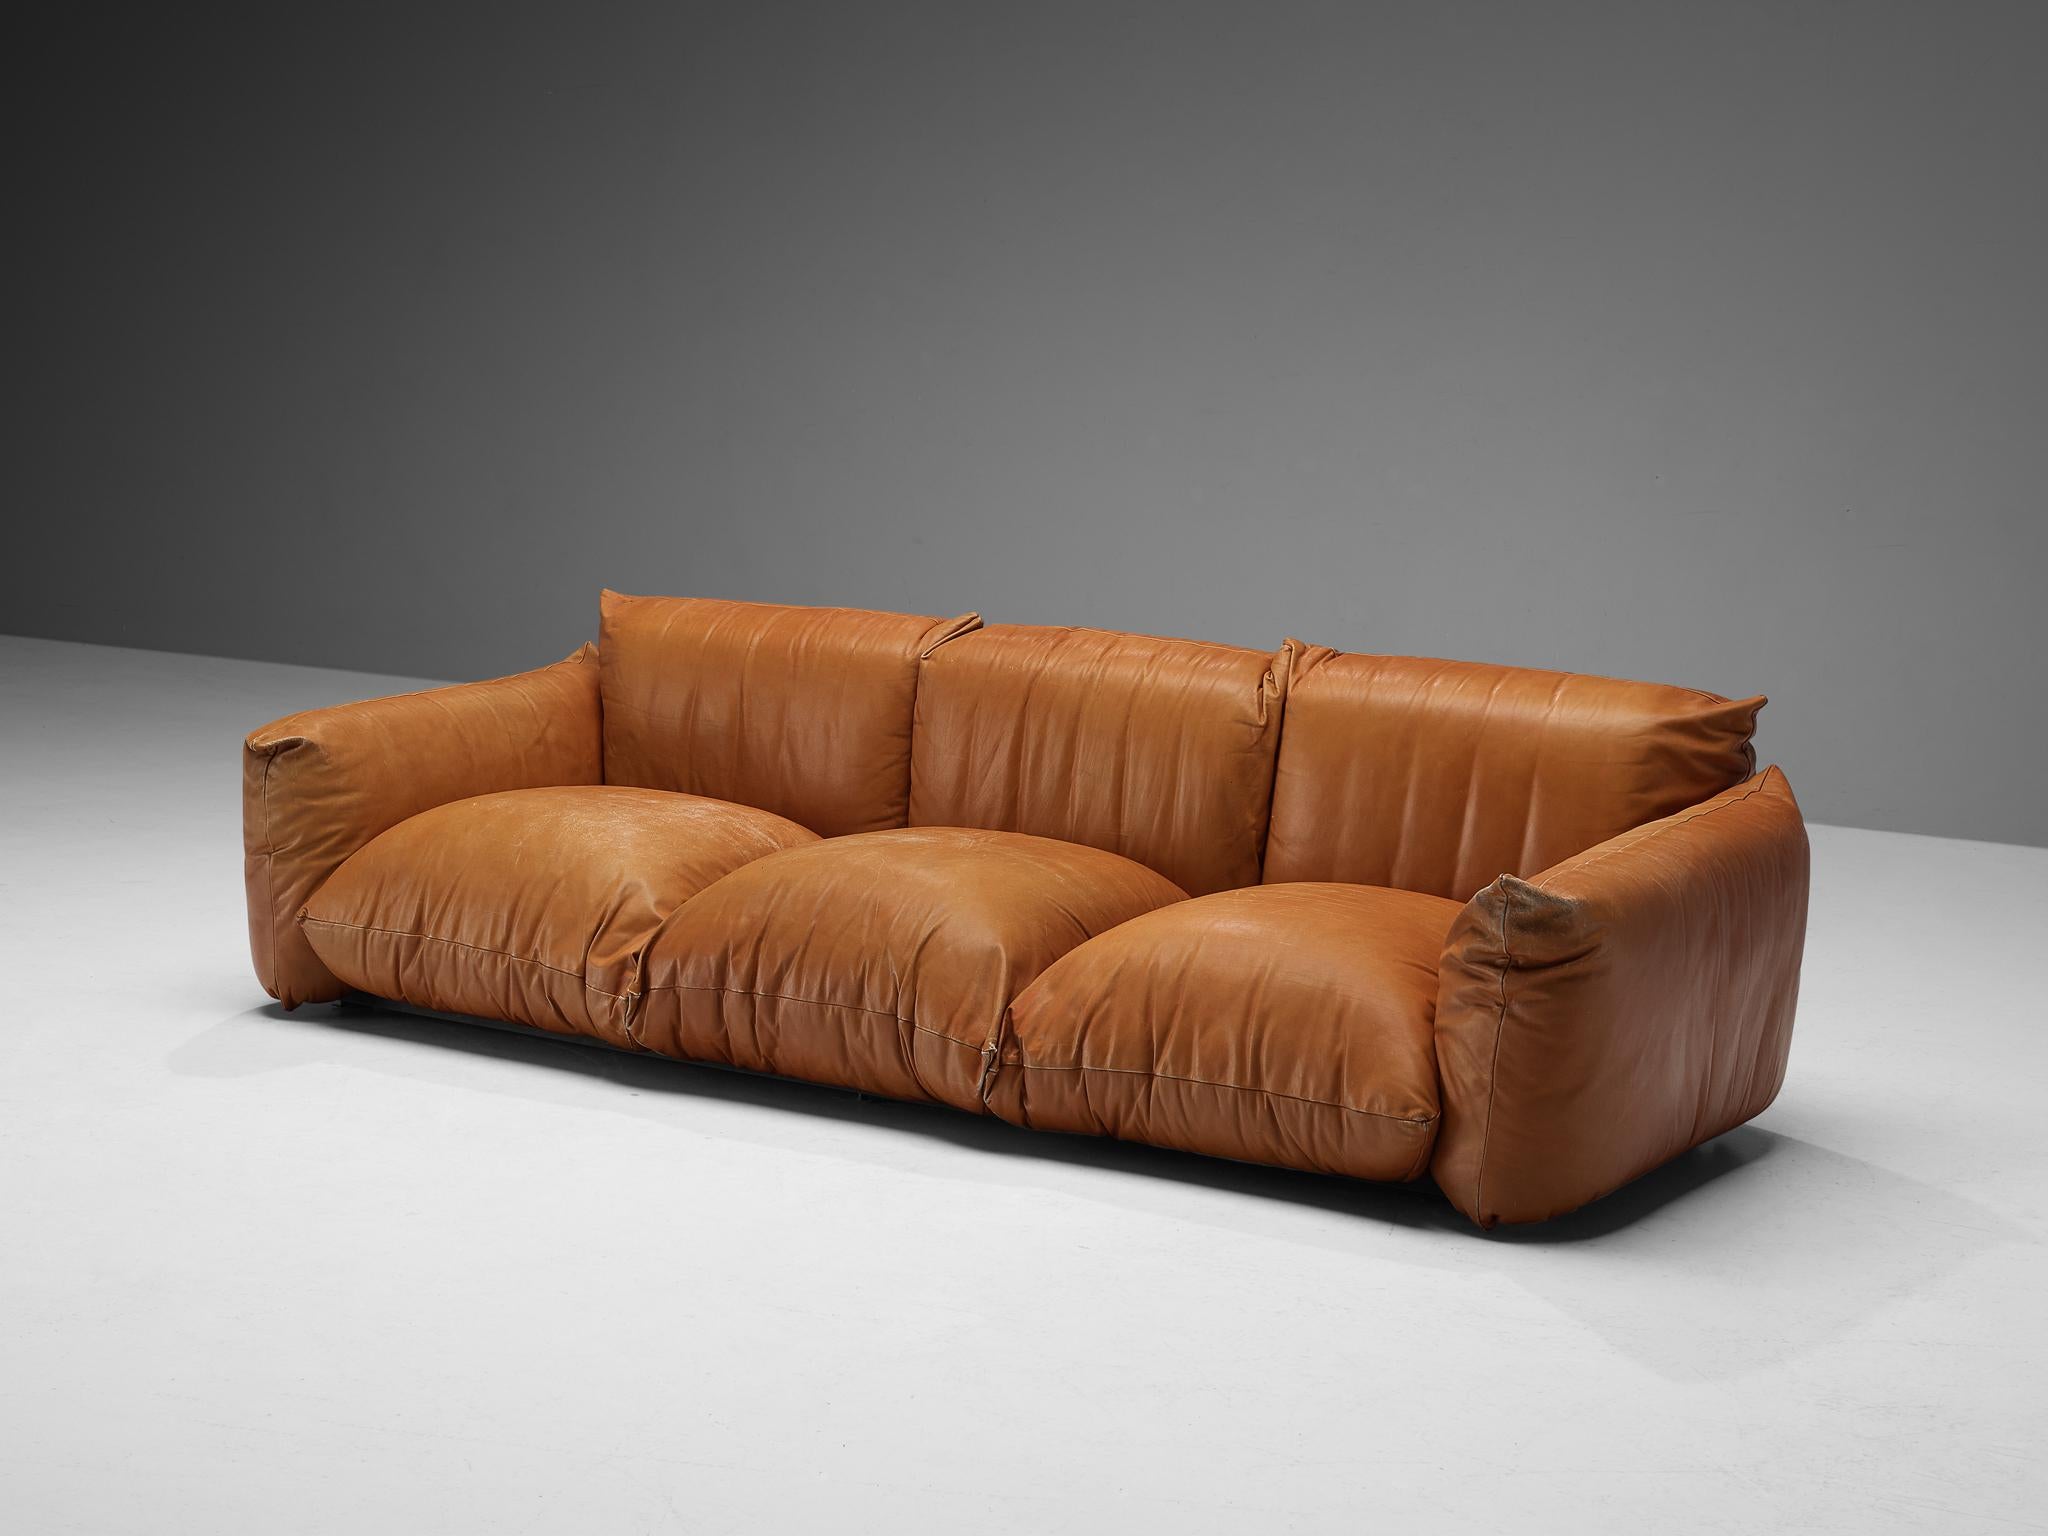 Mario Marenco for Arflex, 'Marenco' sofa, leather, Italy, 1971

This luscious and utterly comfortable three seat sofa is designed by the Italian designer Mario Marenco in 1970. The sofa is made in a beautifully patinated cognac leather, and is in